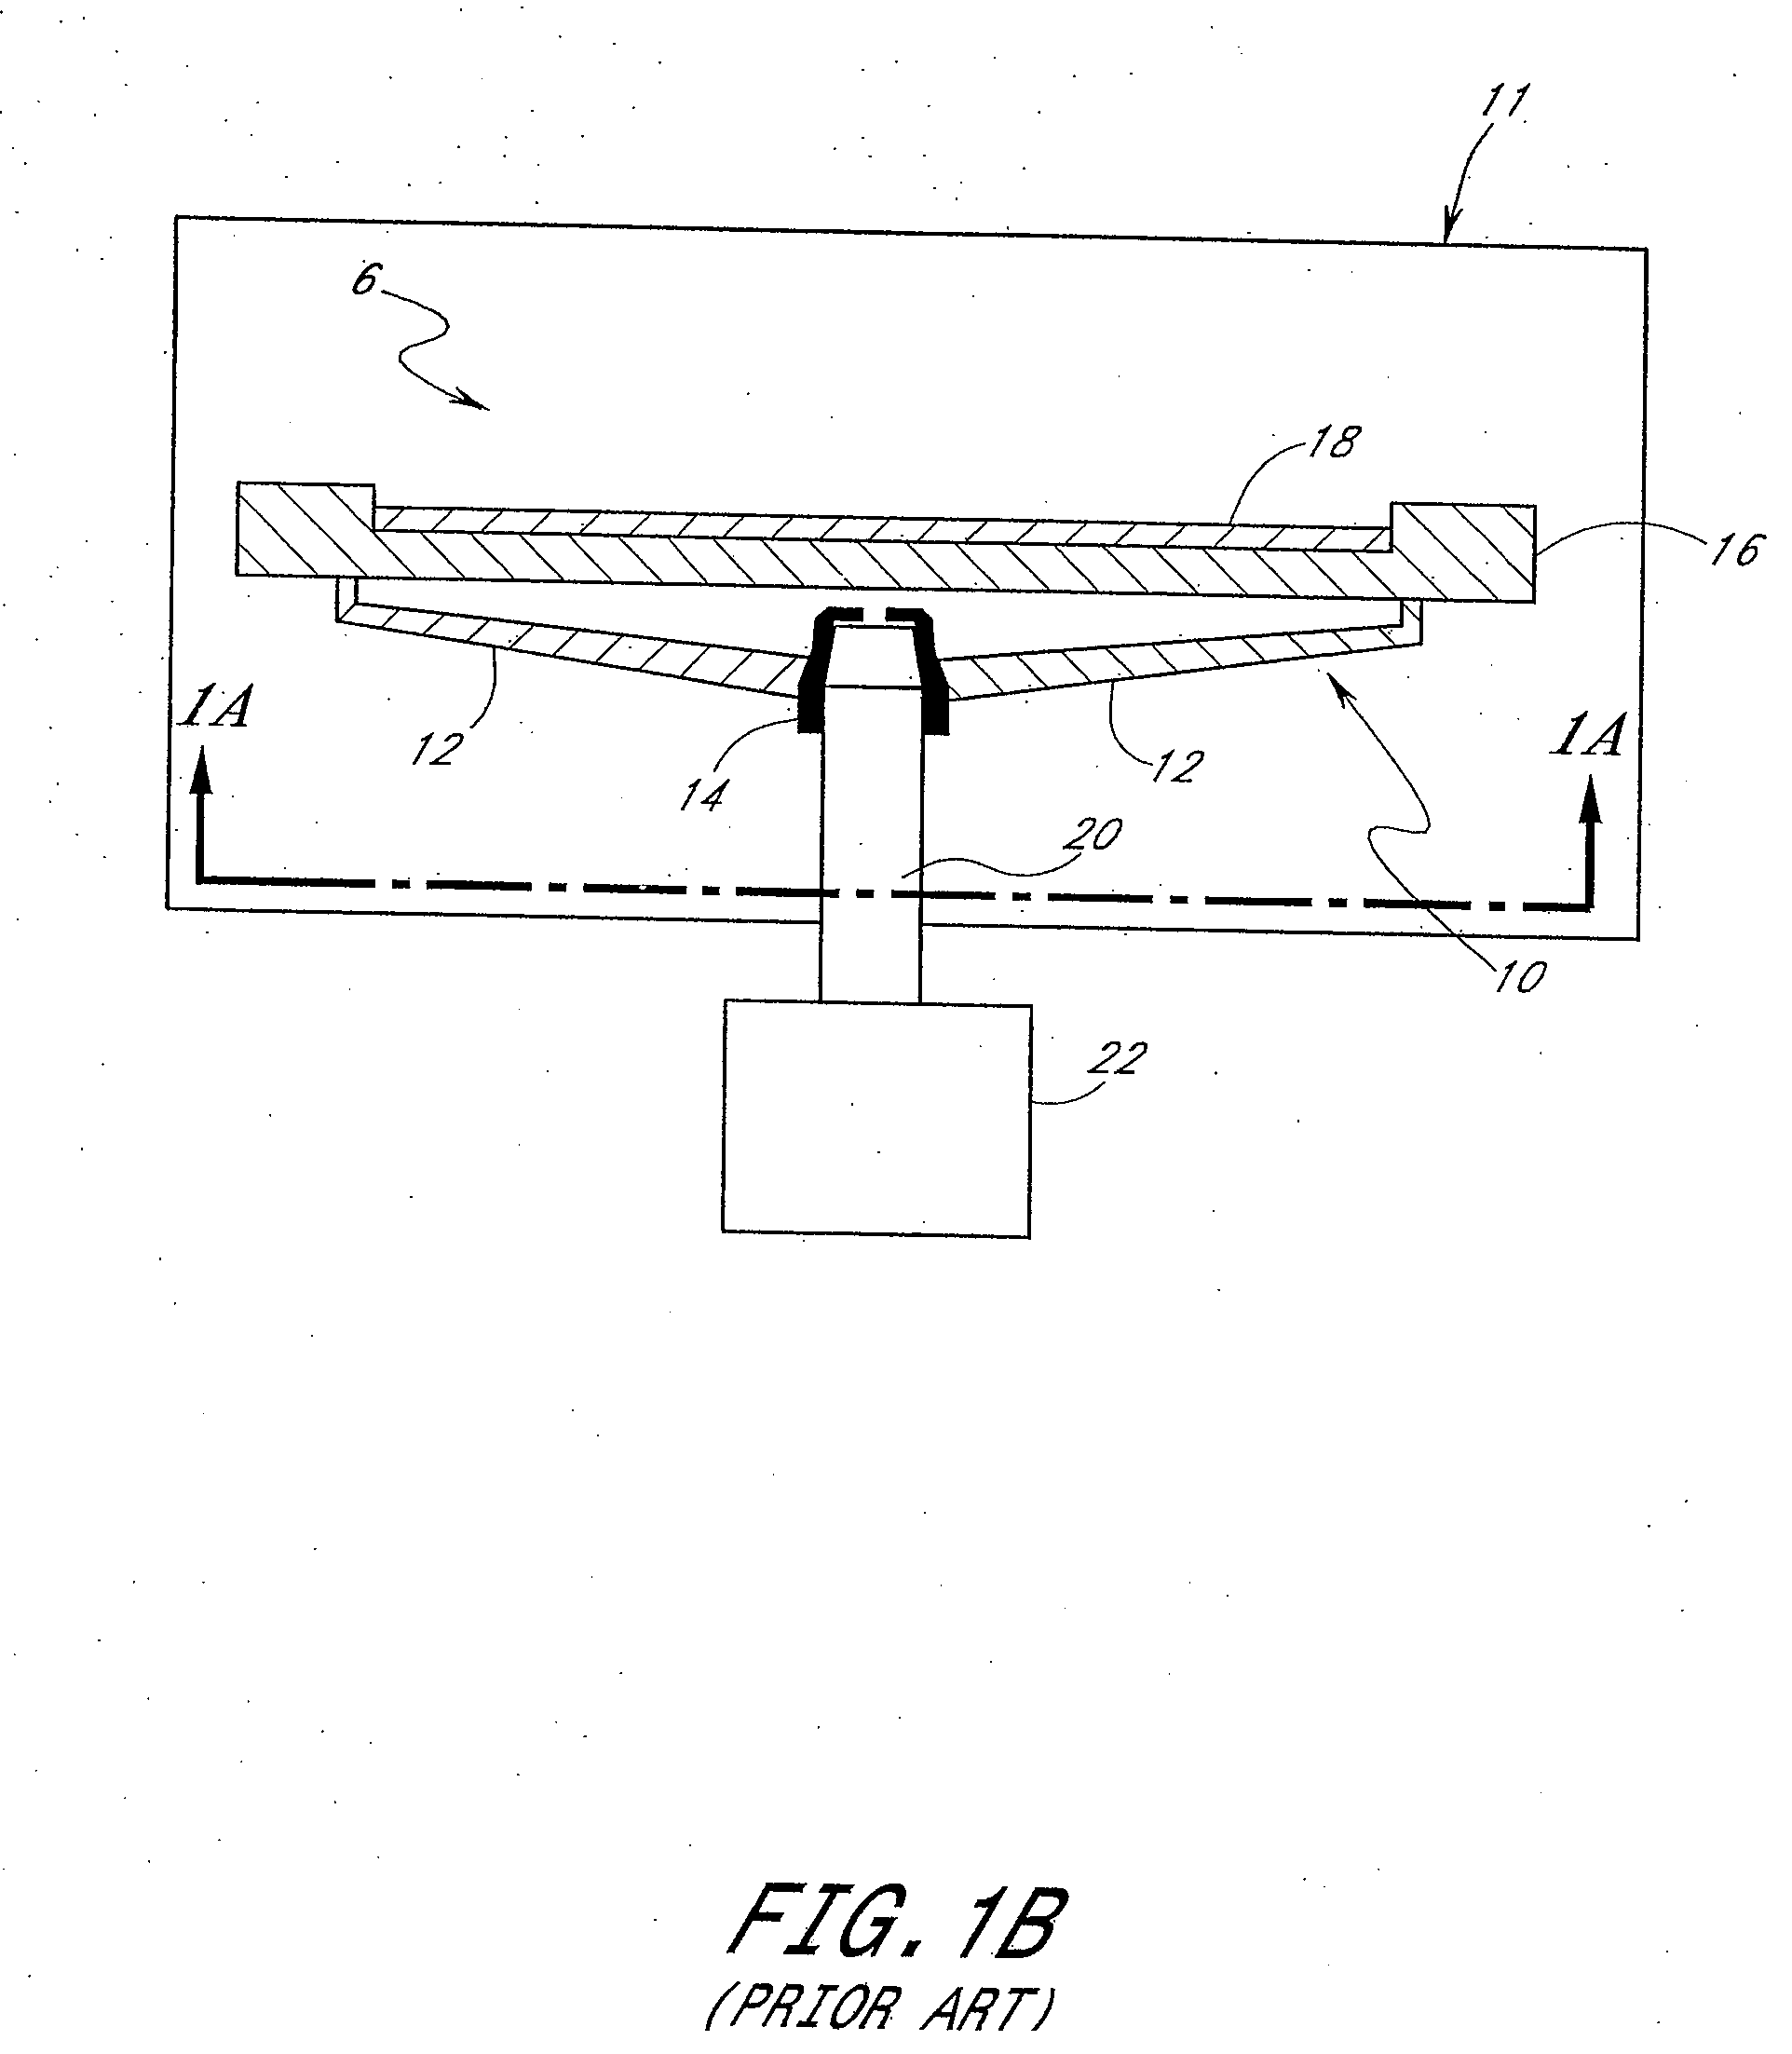 Apparatus and methods for preventing rotational slippage between a vertical shaft and a support structure for a semiconductor wafer holder